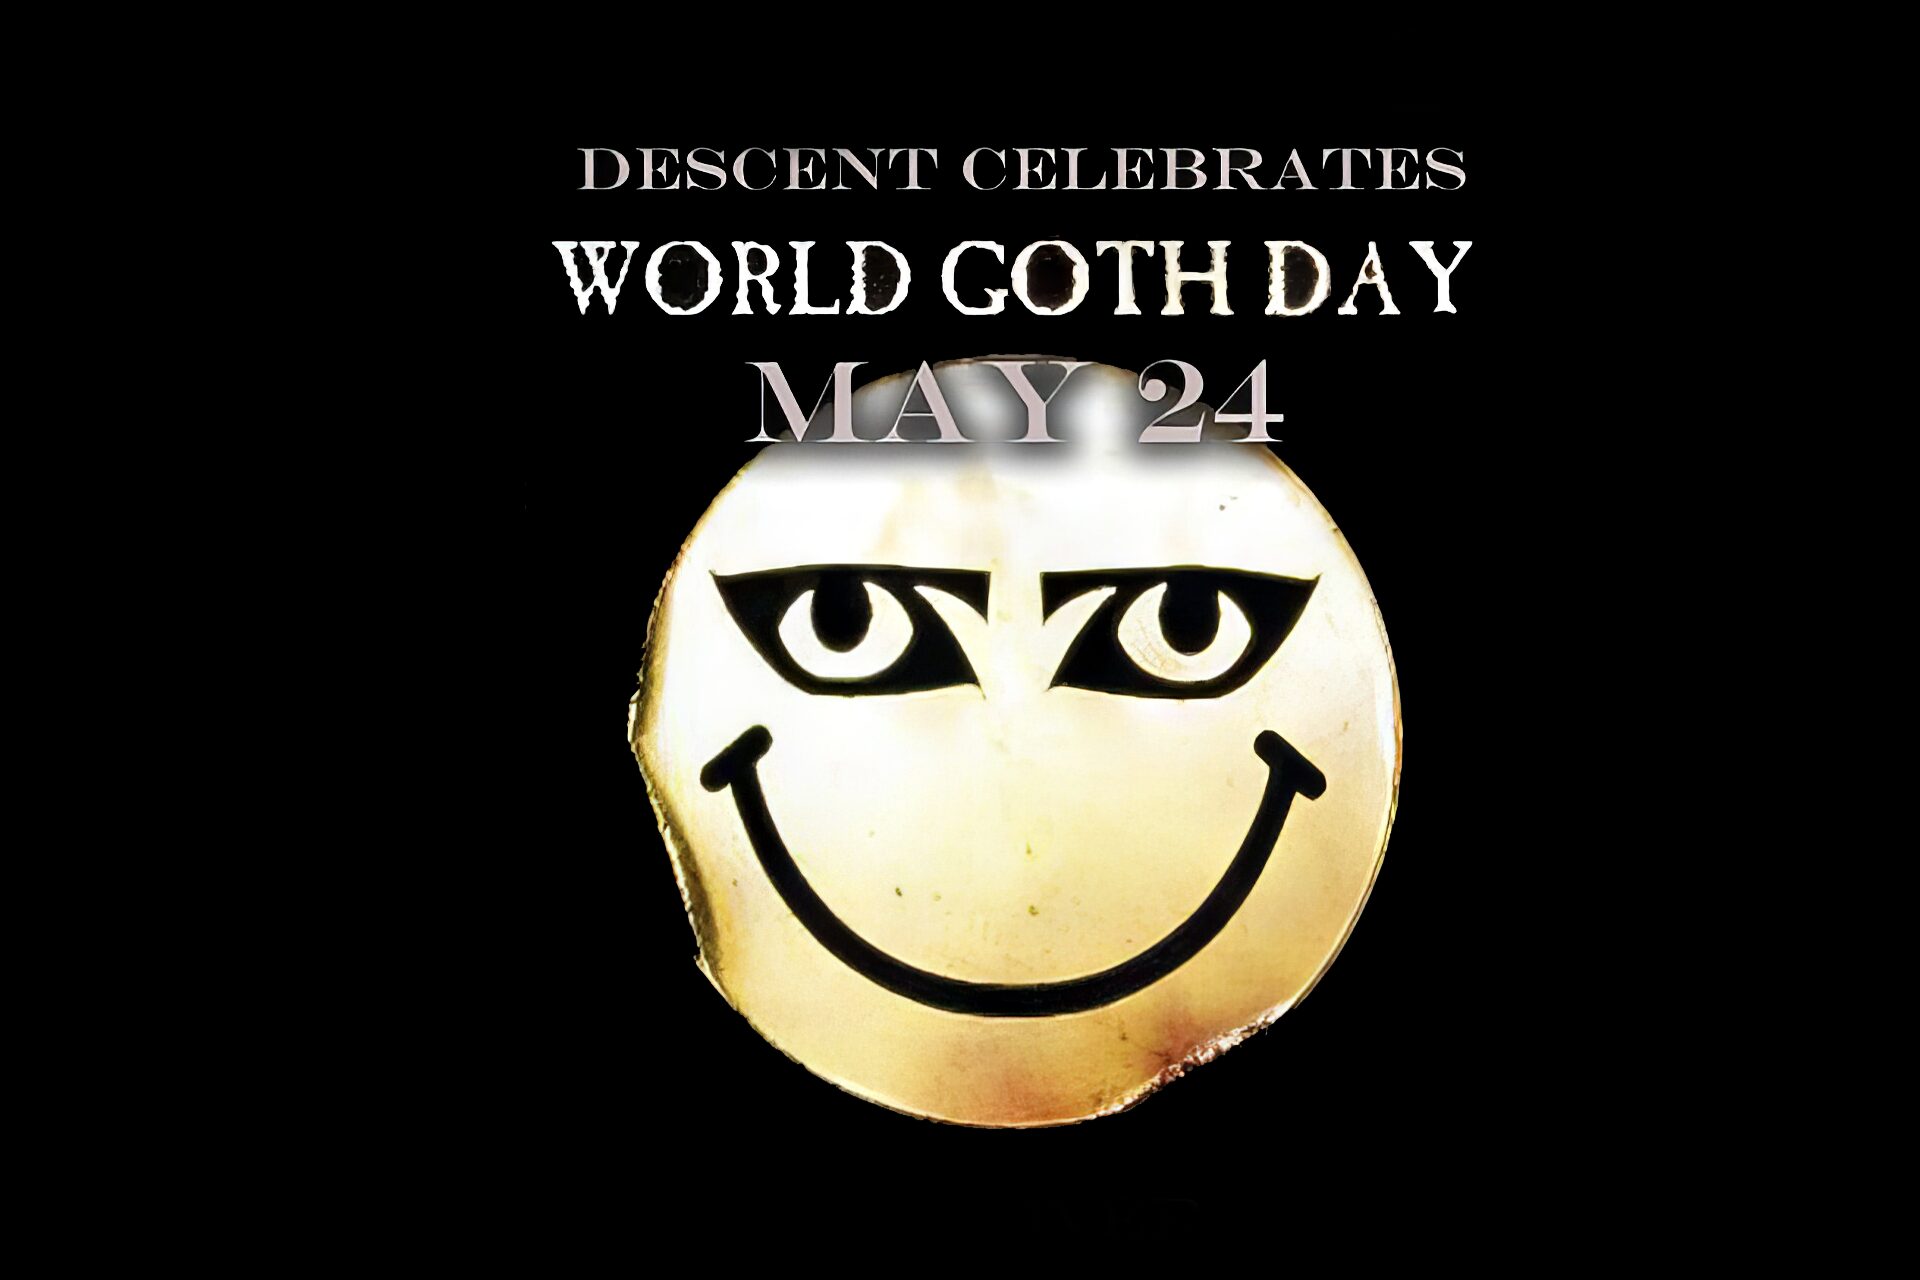 Descent Celebrates World Goth Day – May 24, 2015